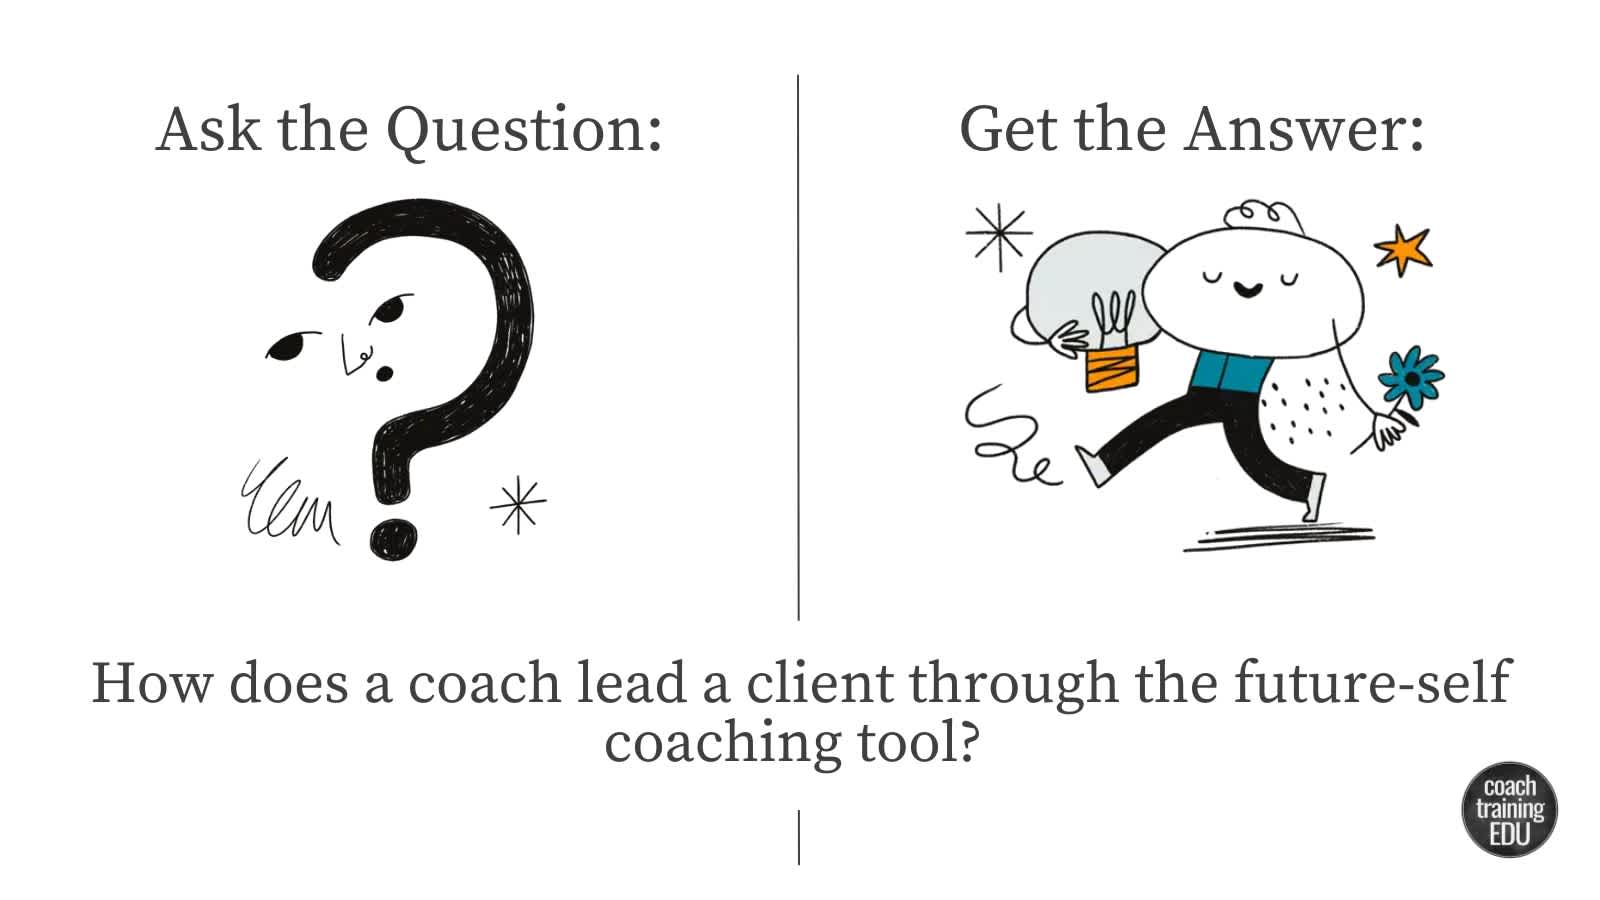 How does a coach lead a client through the future-self coaching tool?